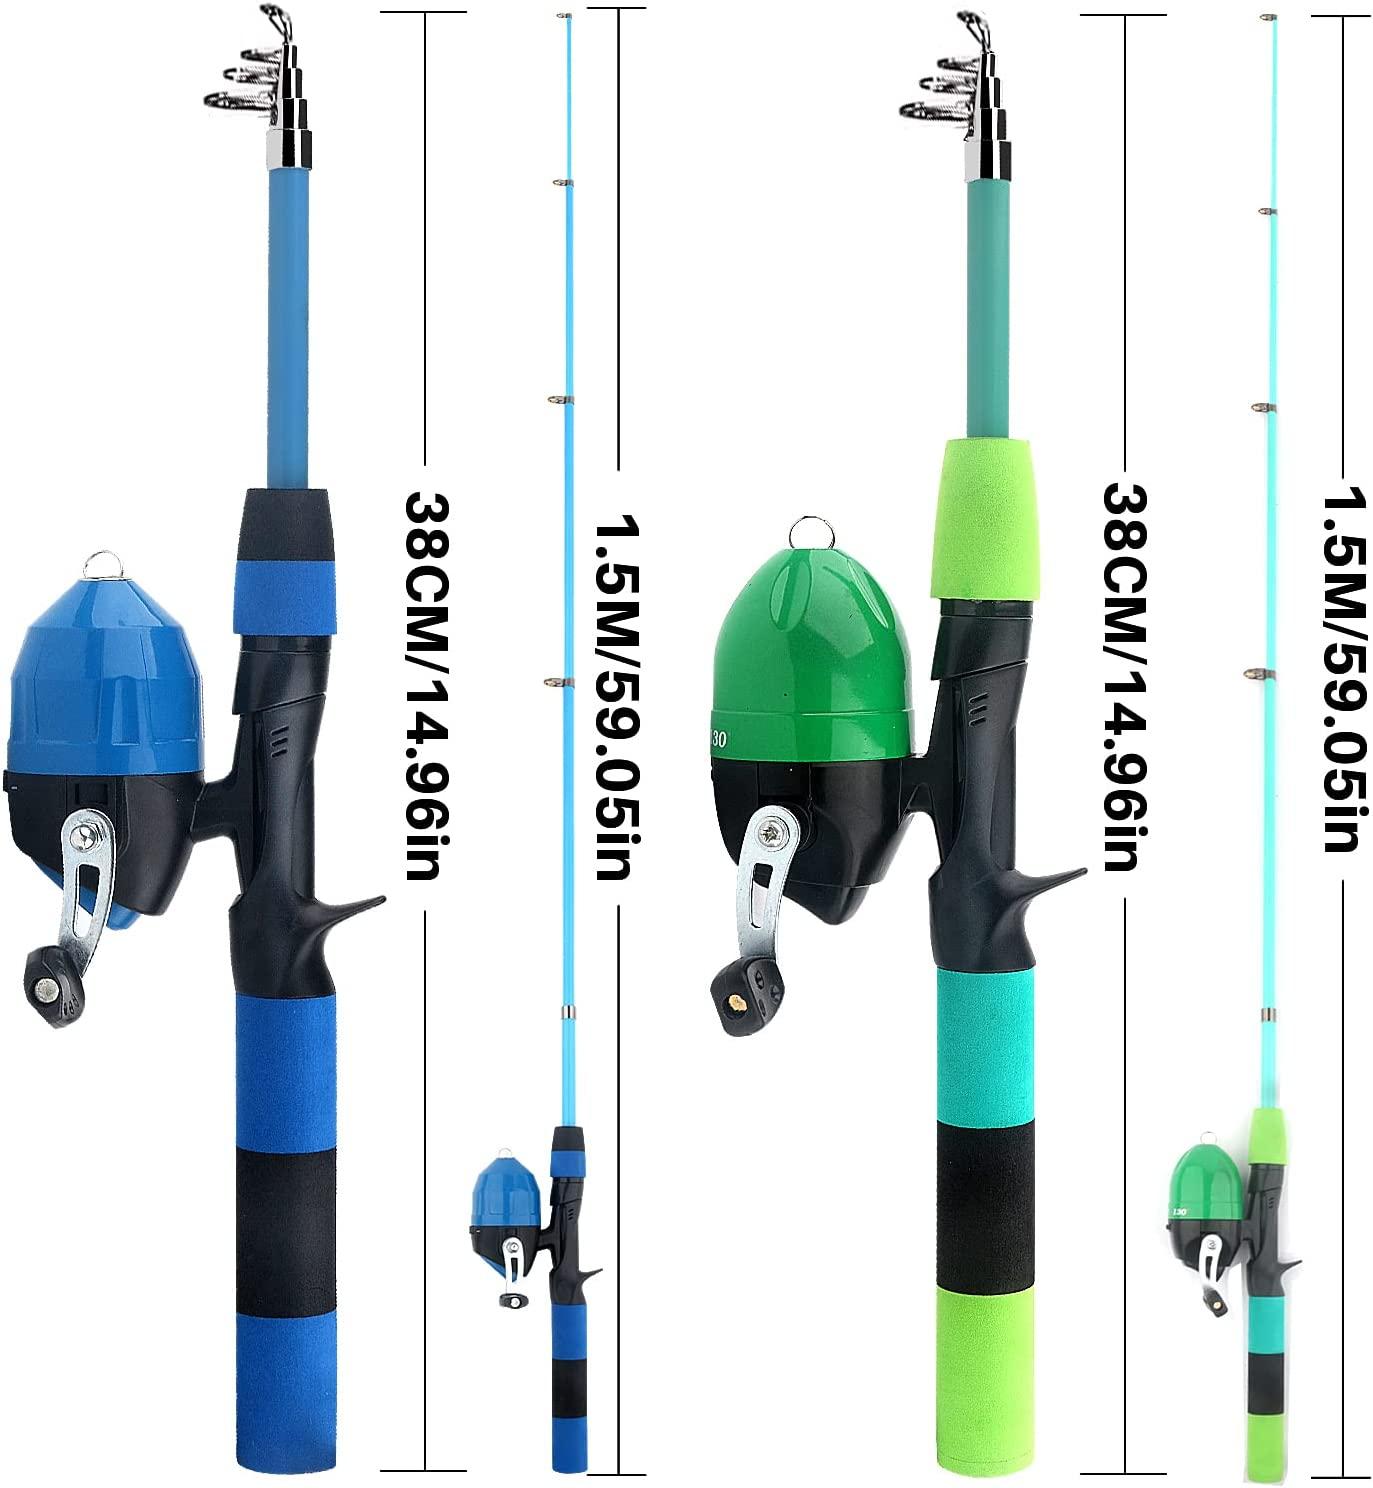 Kids Fishing Pole Set Portable Telescopic Fishing Rod and Reel Combos with  Spincast/Spinning Fishing Reel Full Kits for Beginner and Youth Girls Boys